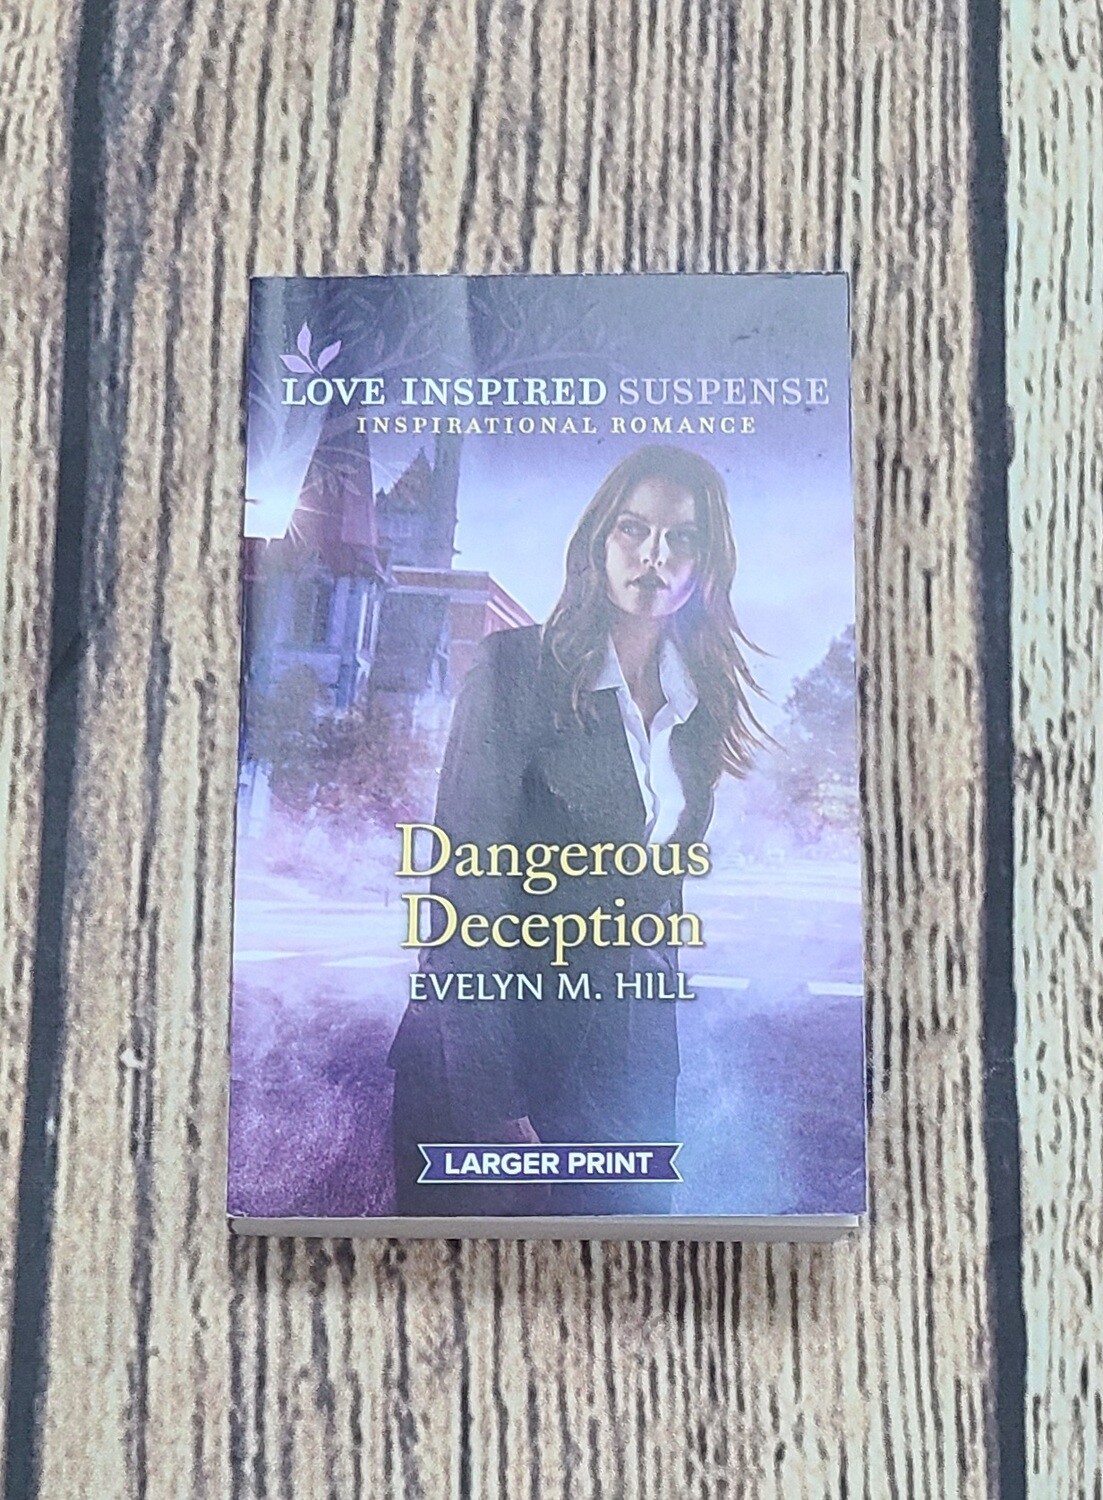 Dangerous Deception by Evelyn M. Hill - Great Condition